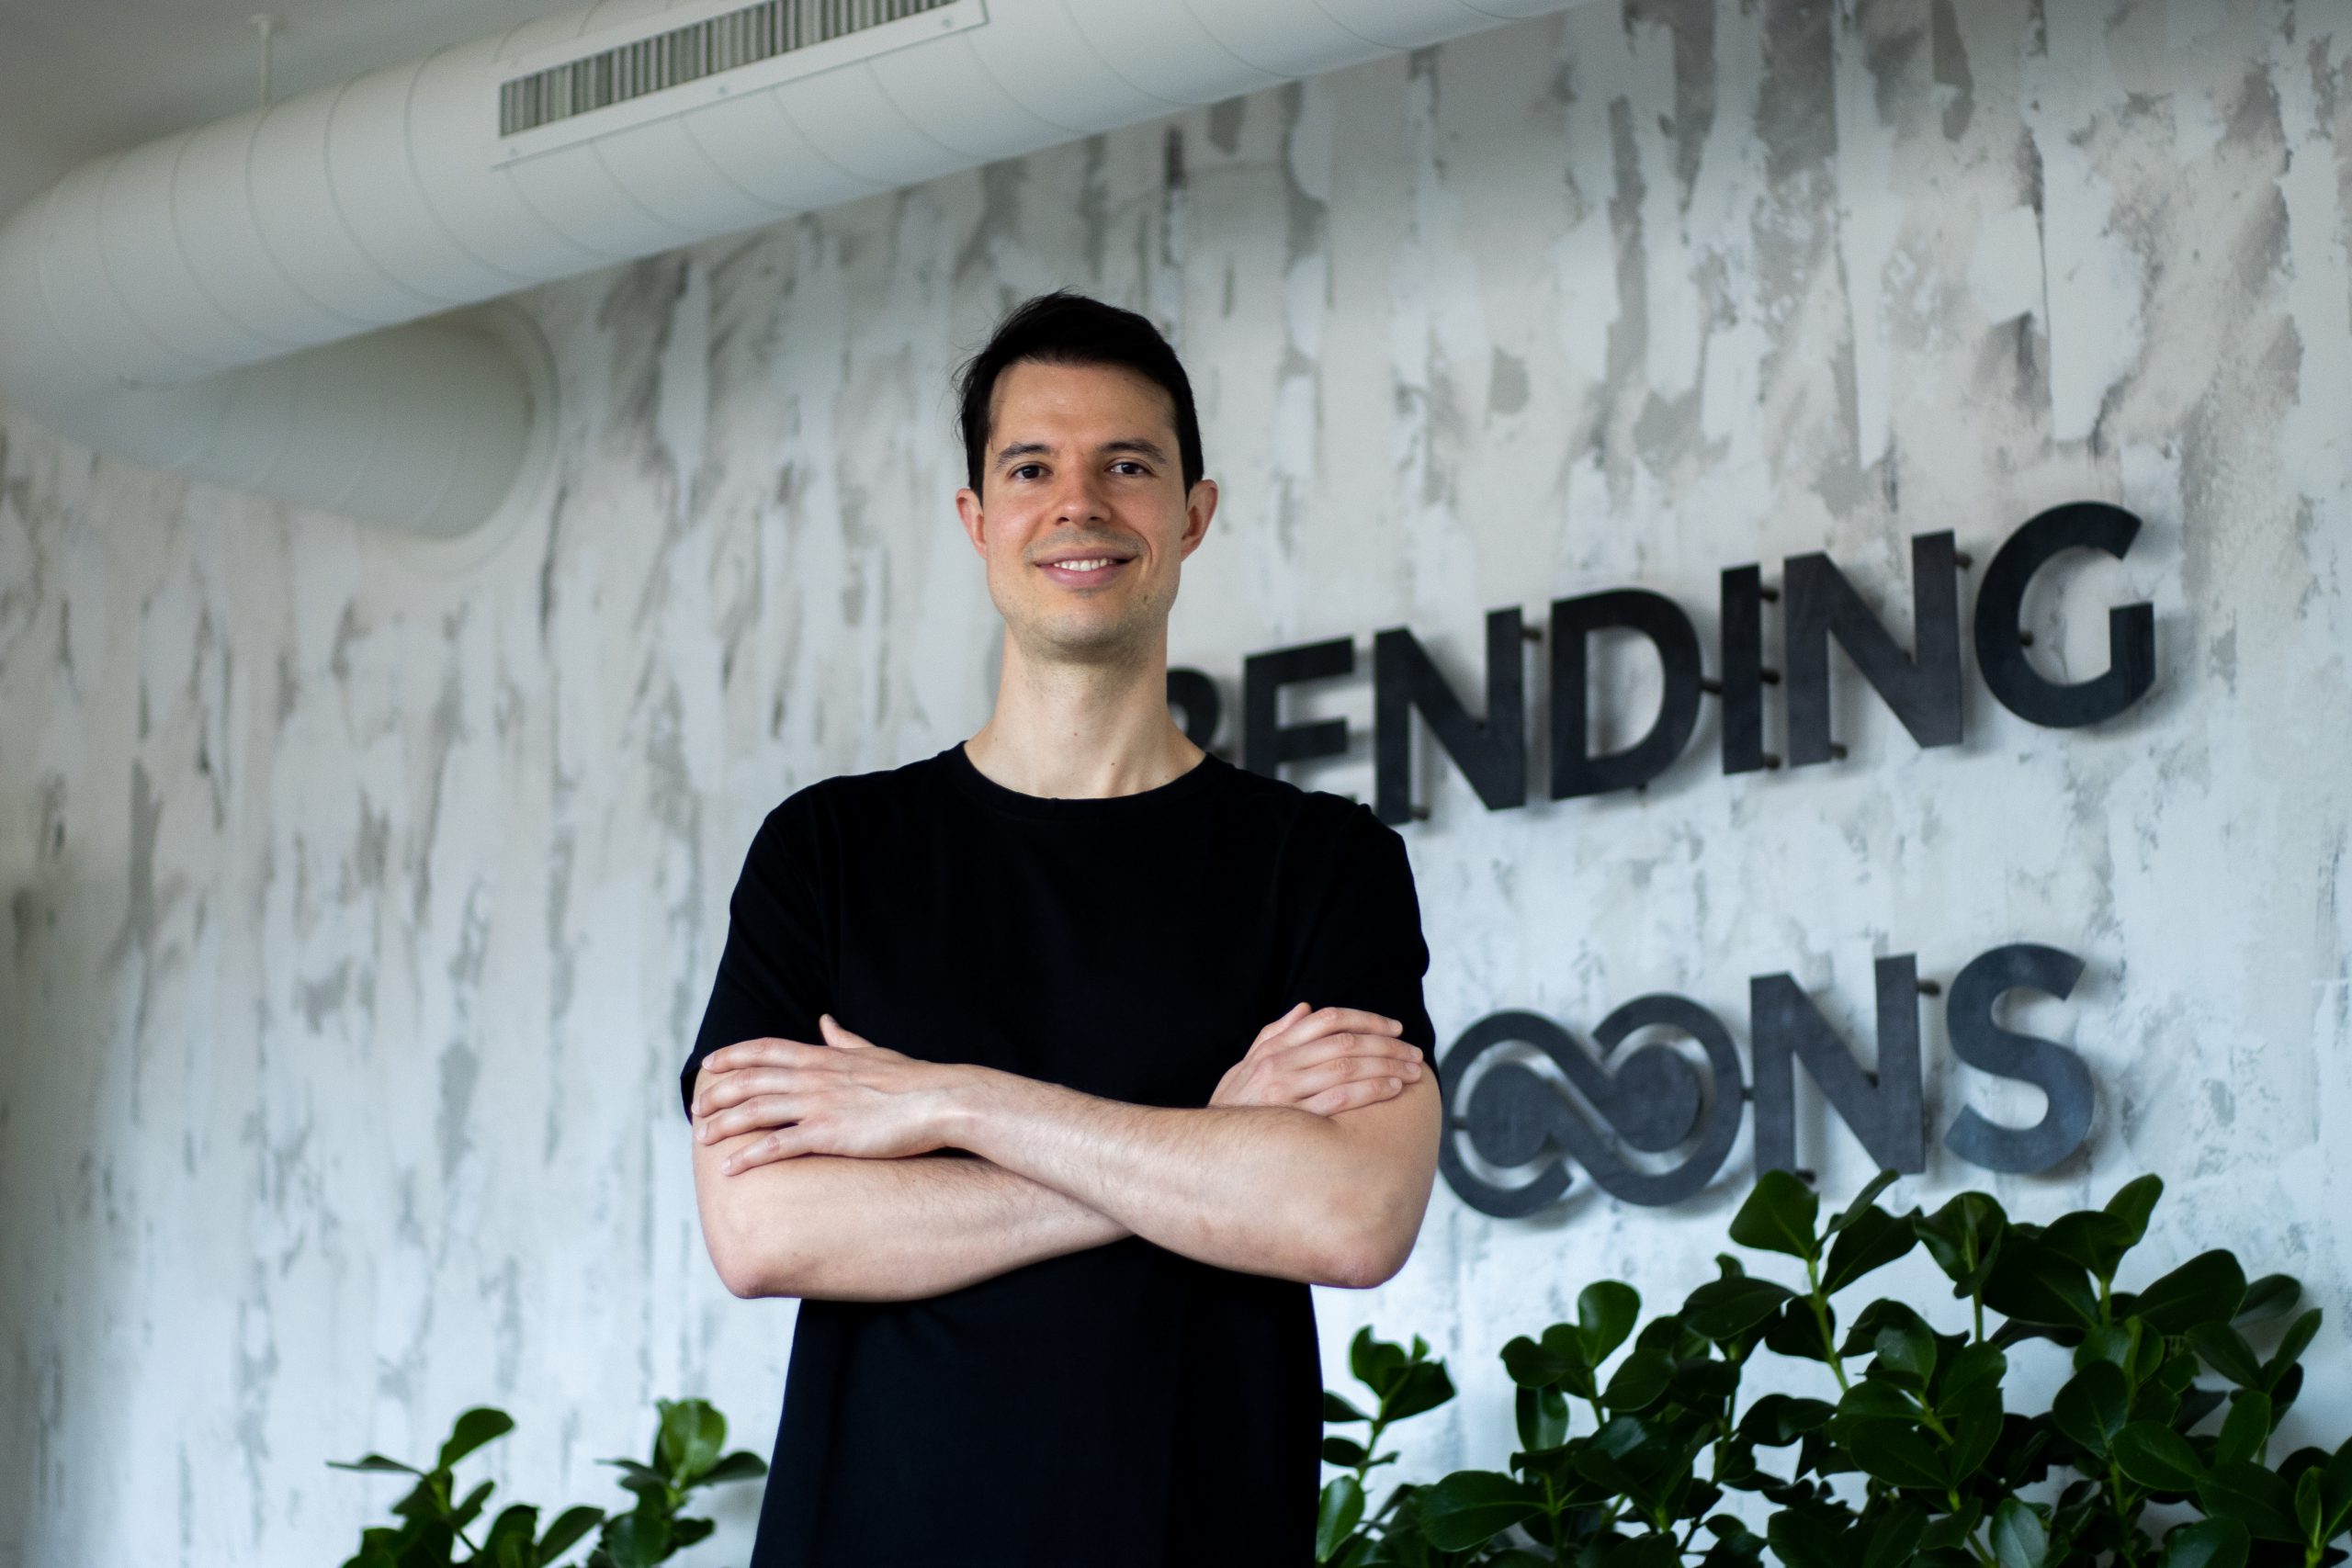 Bending Spoons, Owner of Evernote and Meetup, Secures $155M in Equity Funding